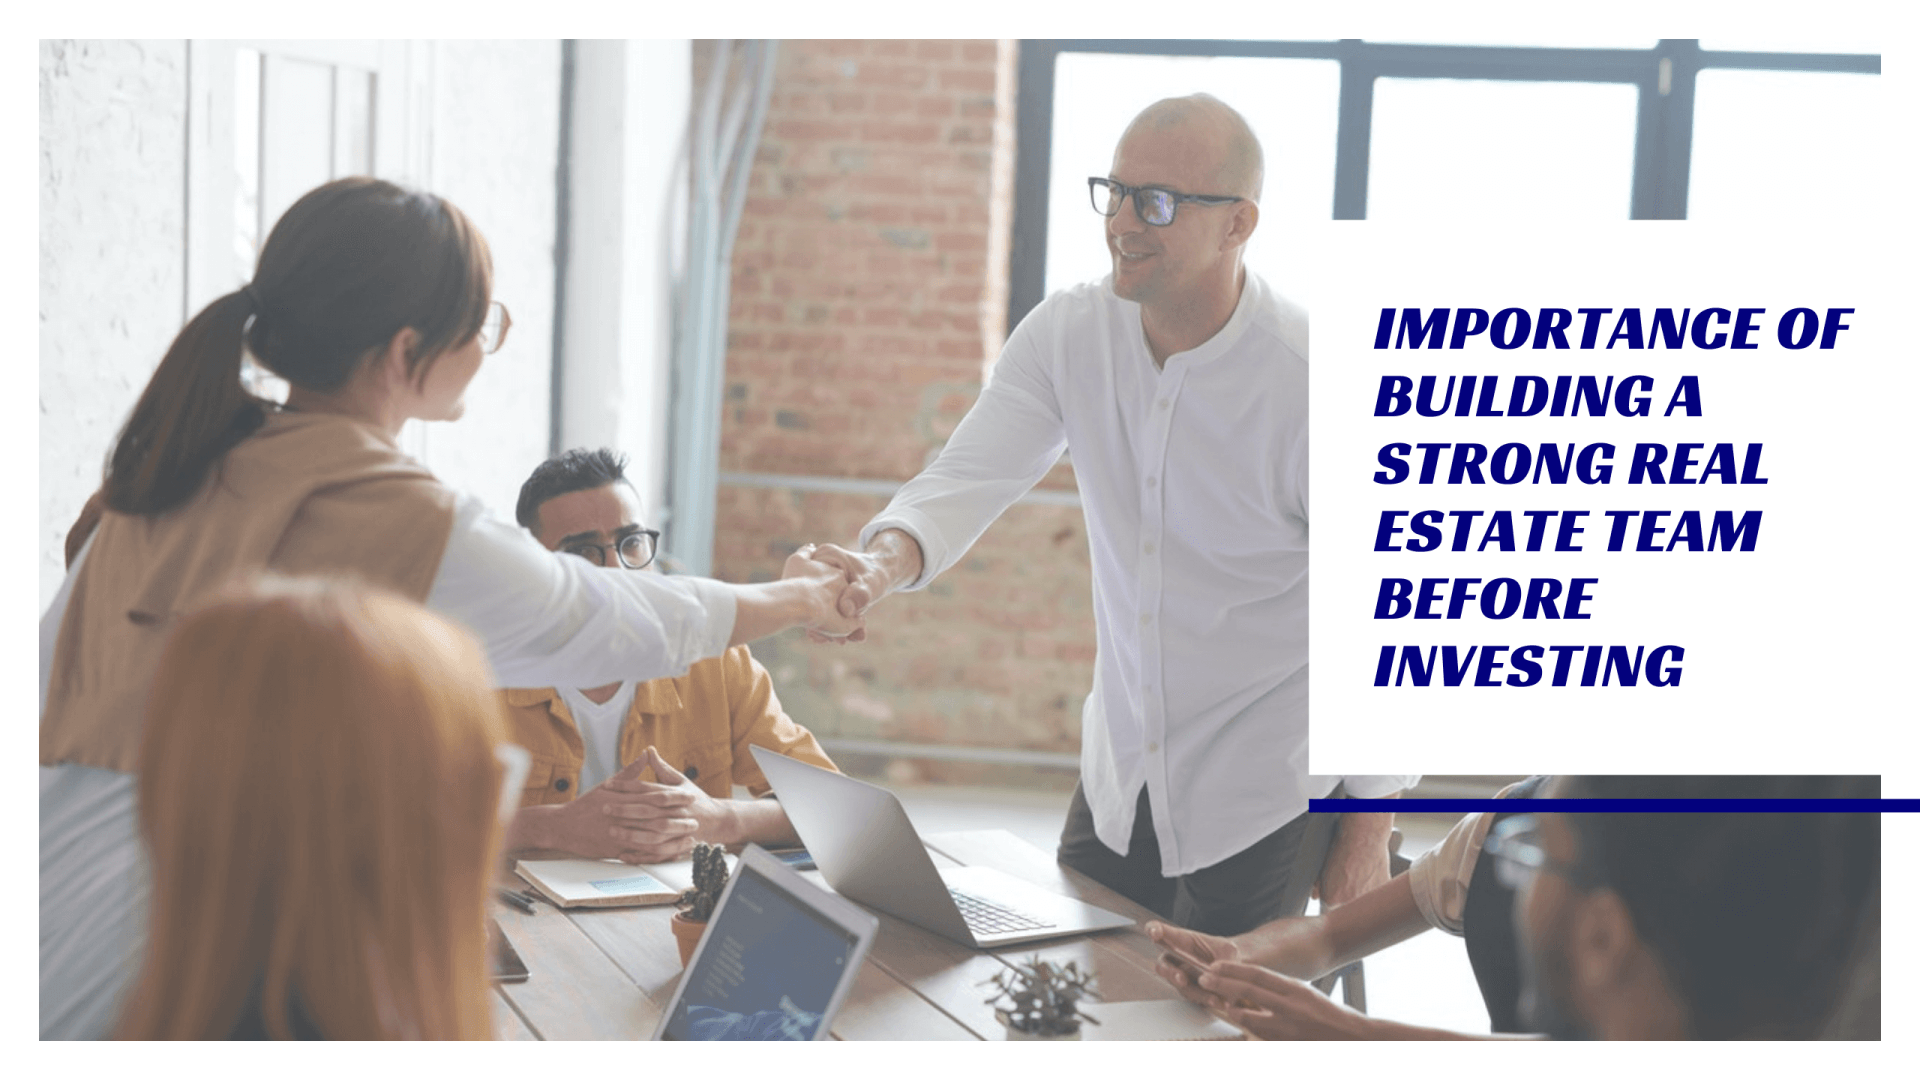 Why is It Important to Build a Strong Real Estate Team Before Investing in Rental Properties? - article banner